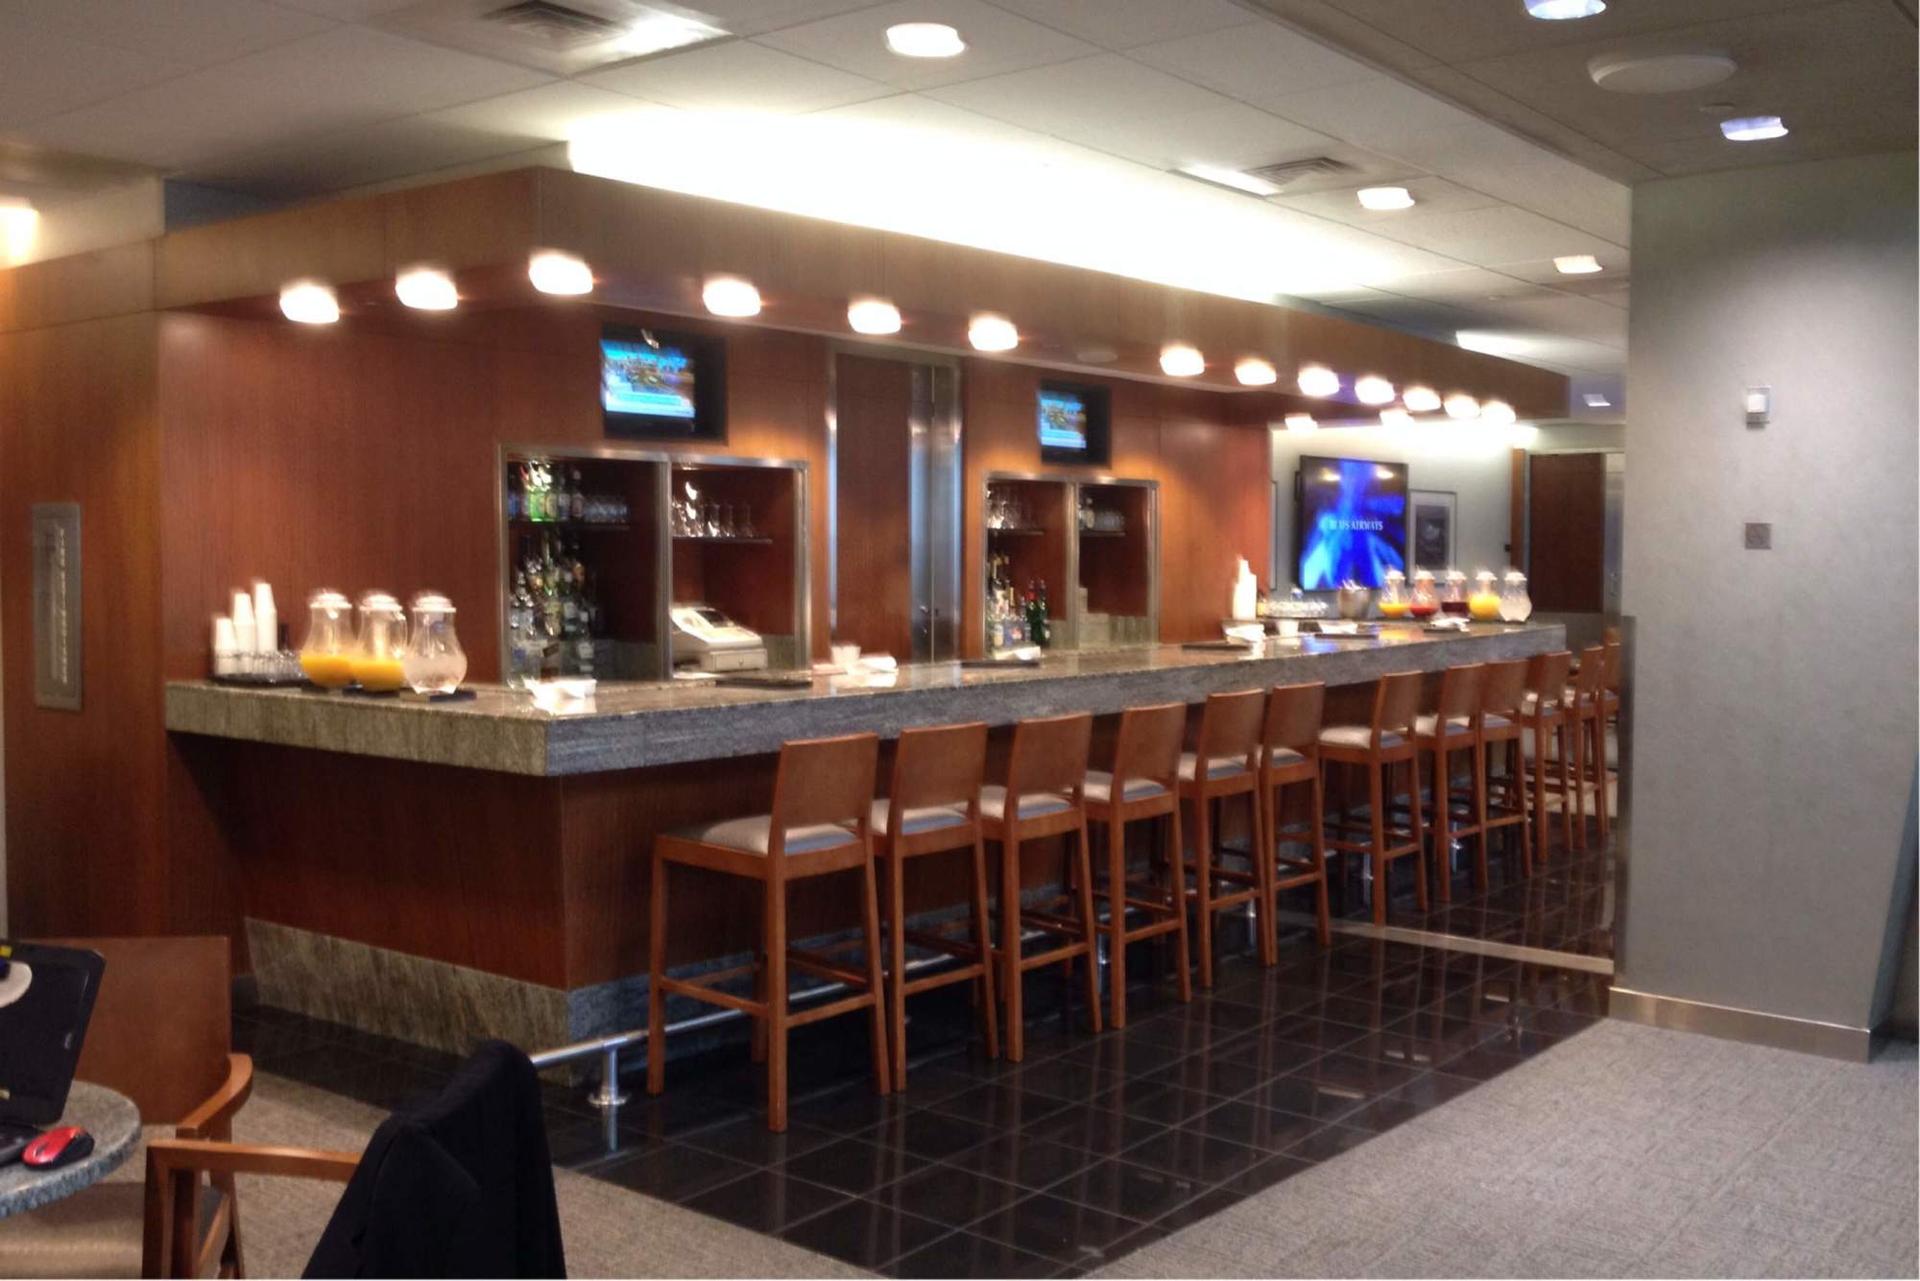 American Airlines Admirals Club image 12 of 48